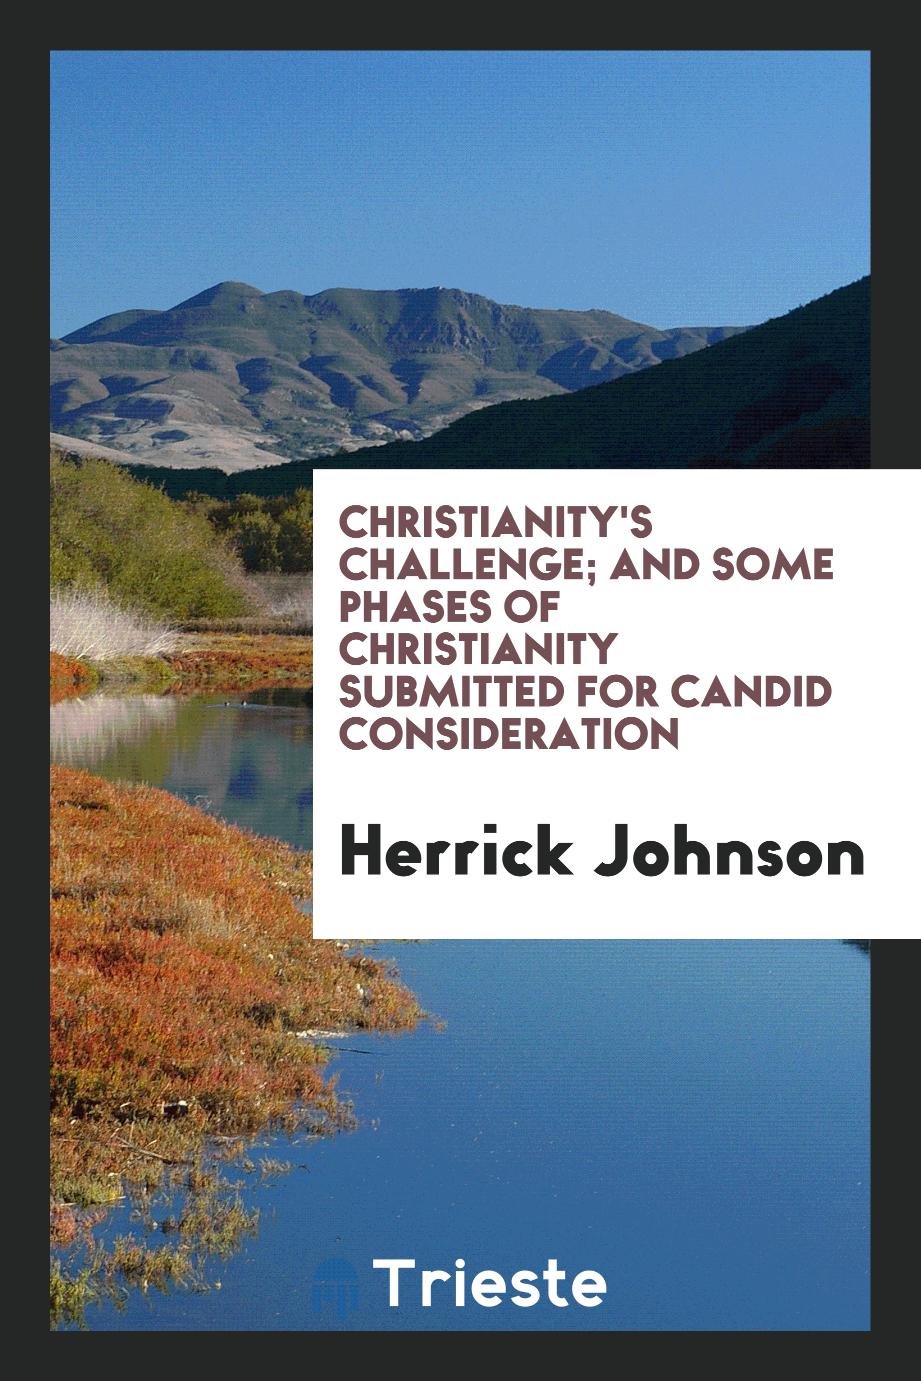 Christianity's challenge; and some phases of Christianity submitted for candid consideration